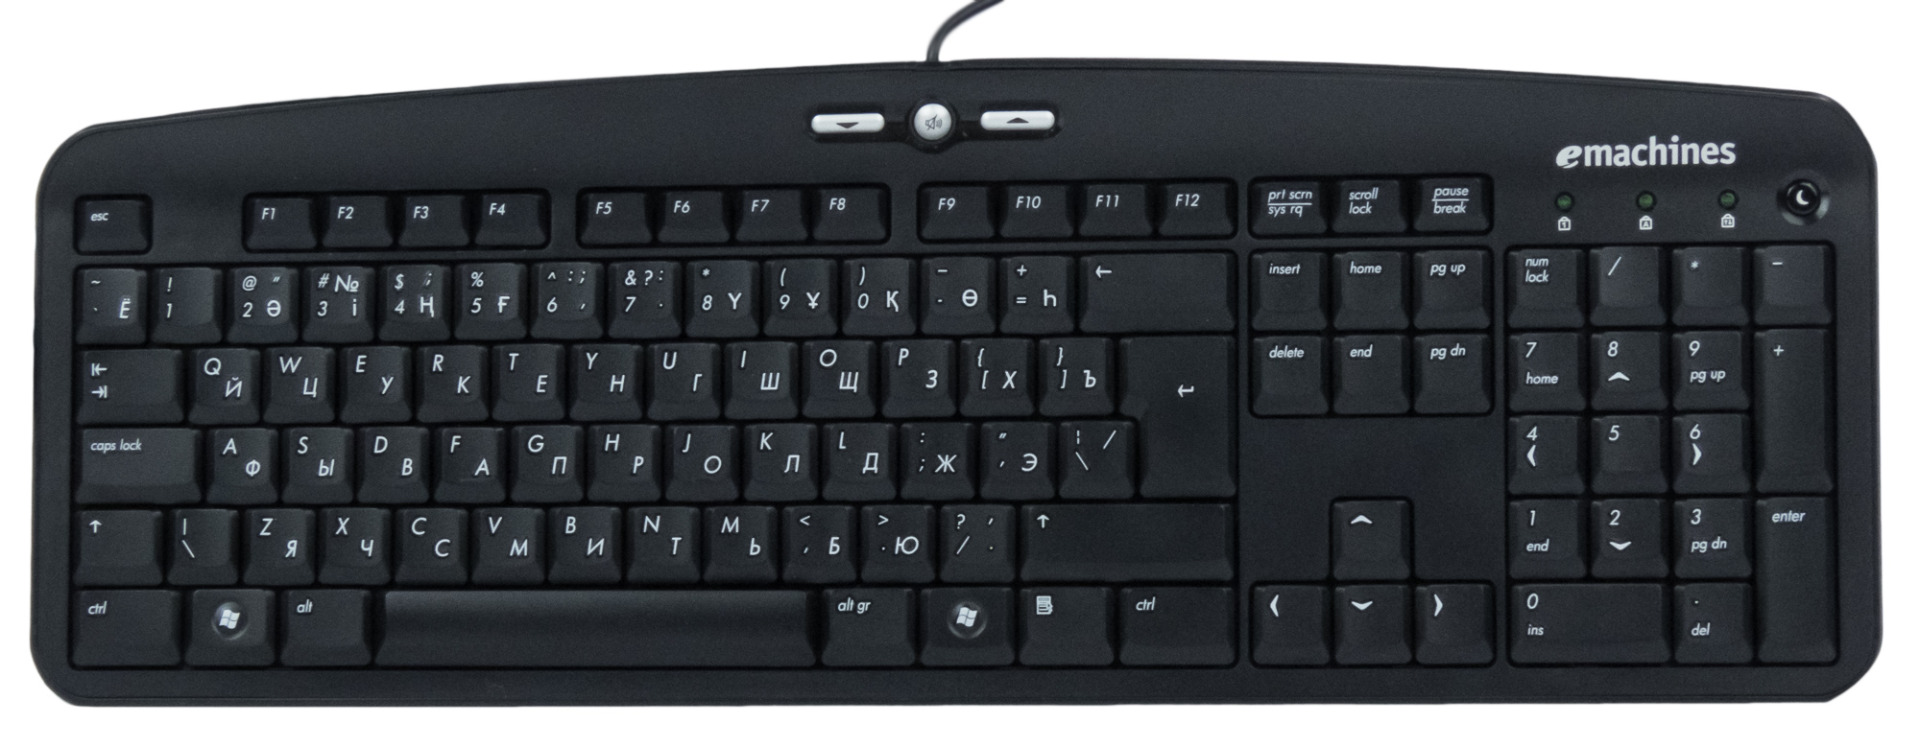 EMACHINES KAZAKH  PS 2 WIRED QWERTY KEYBOARD  KB PS203 354 